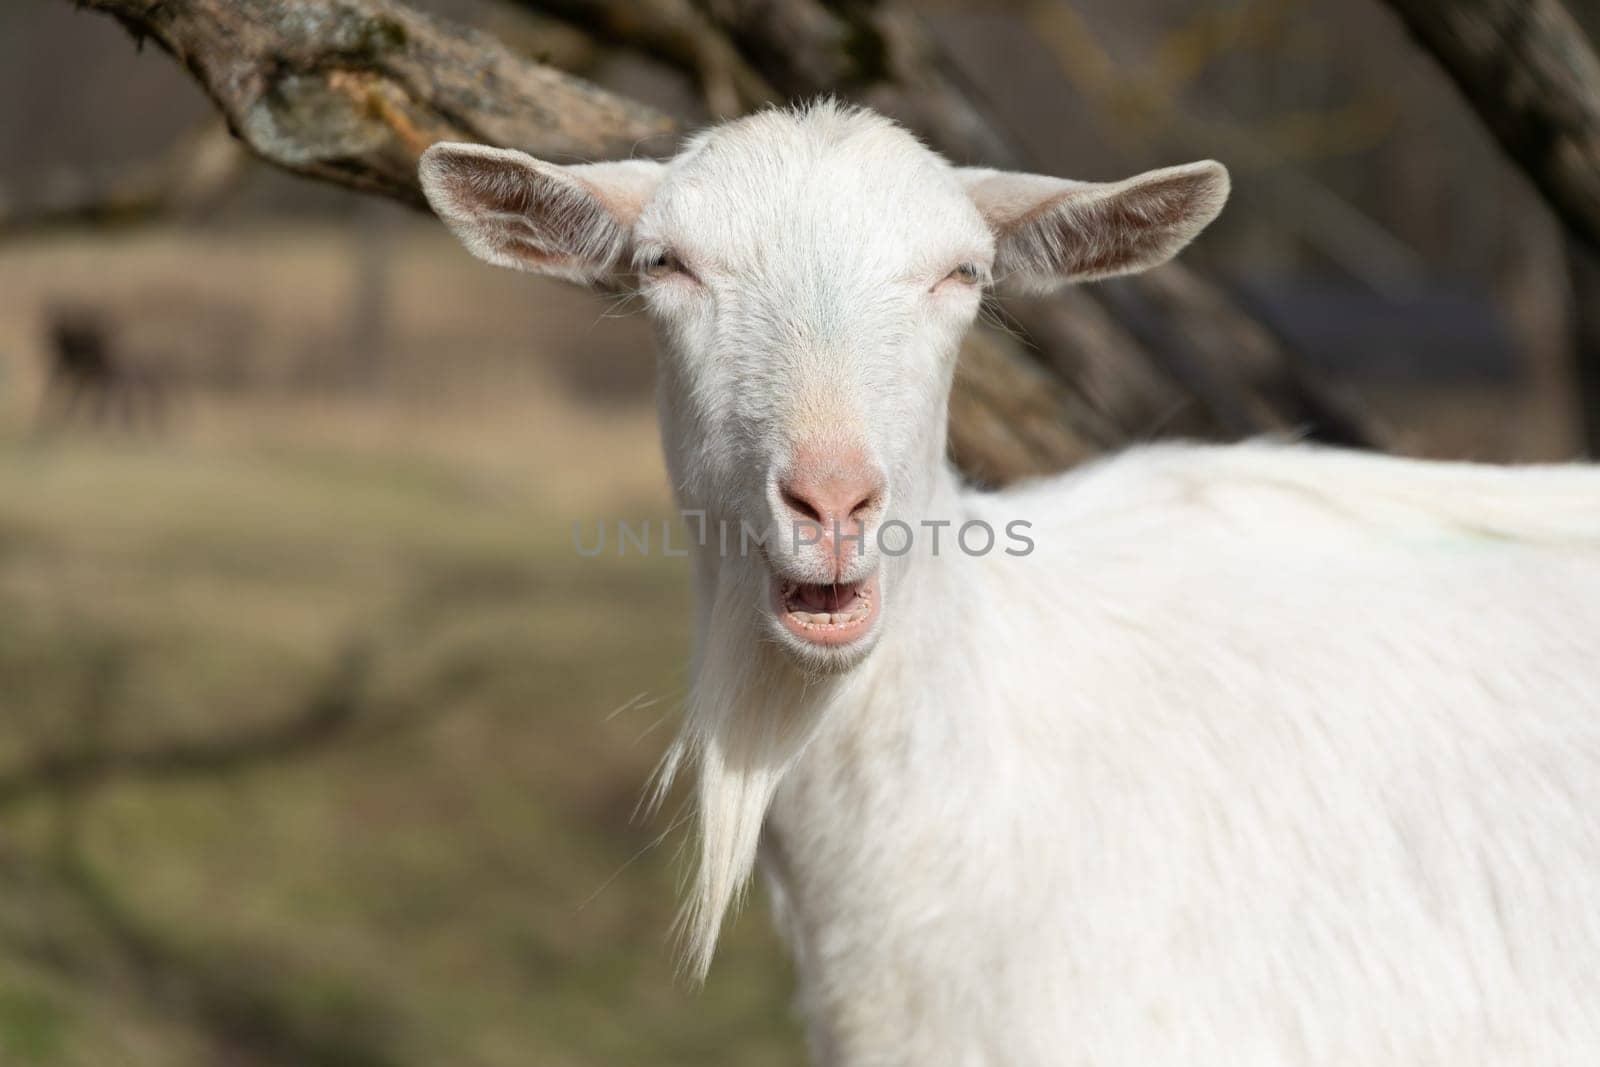 A Goat Grazing Near a Tree by TRMK